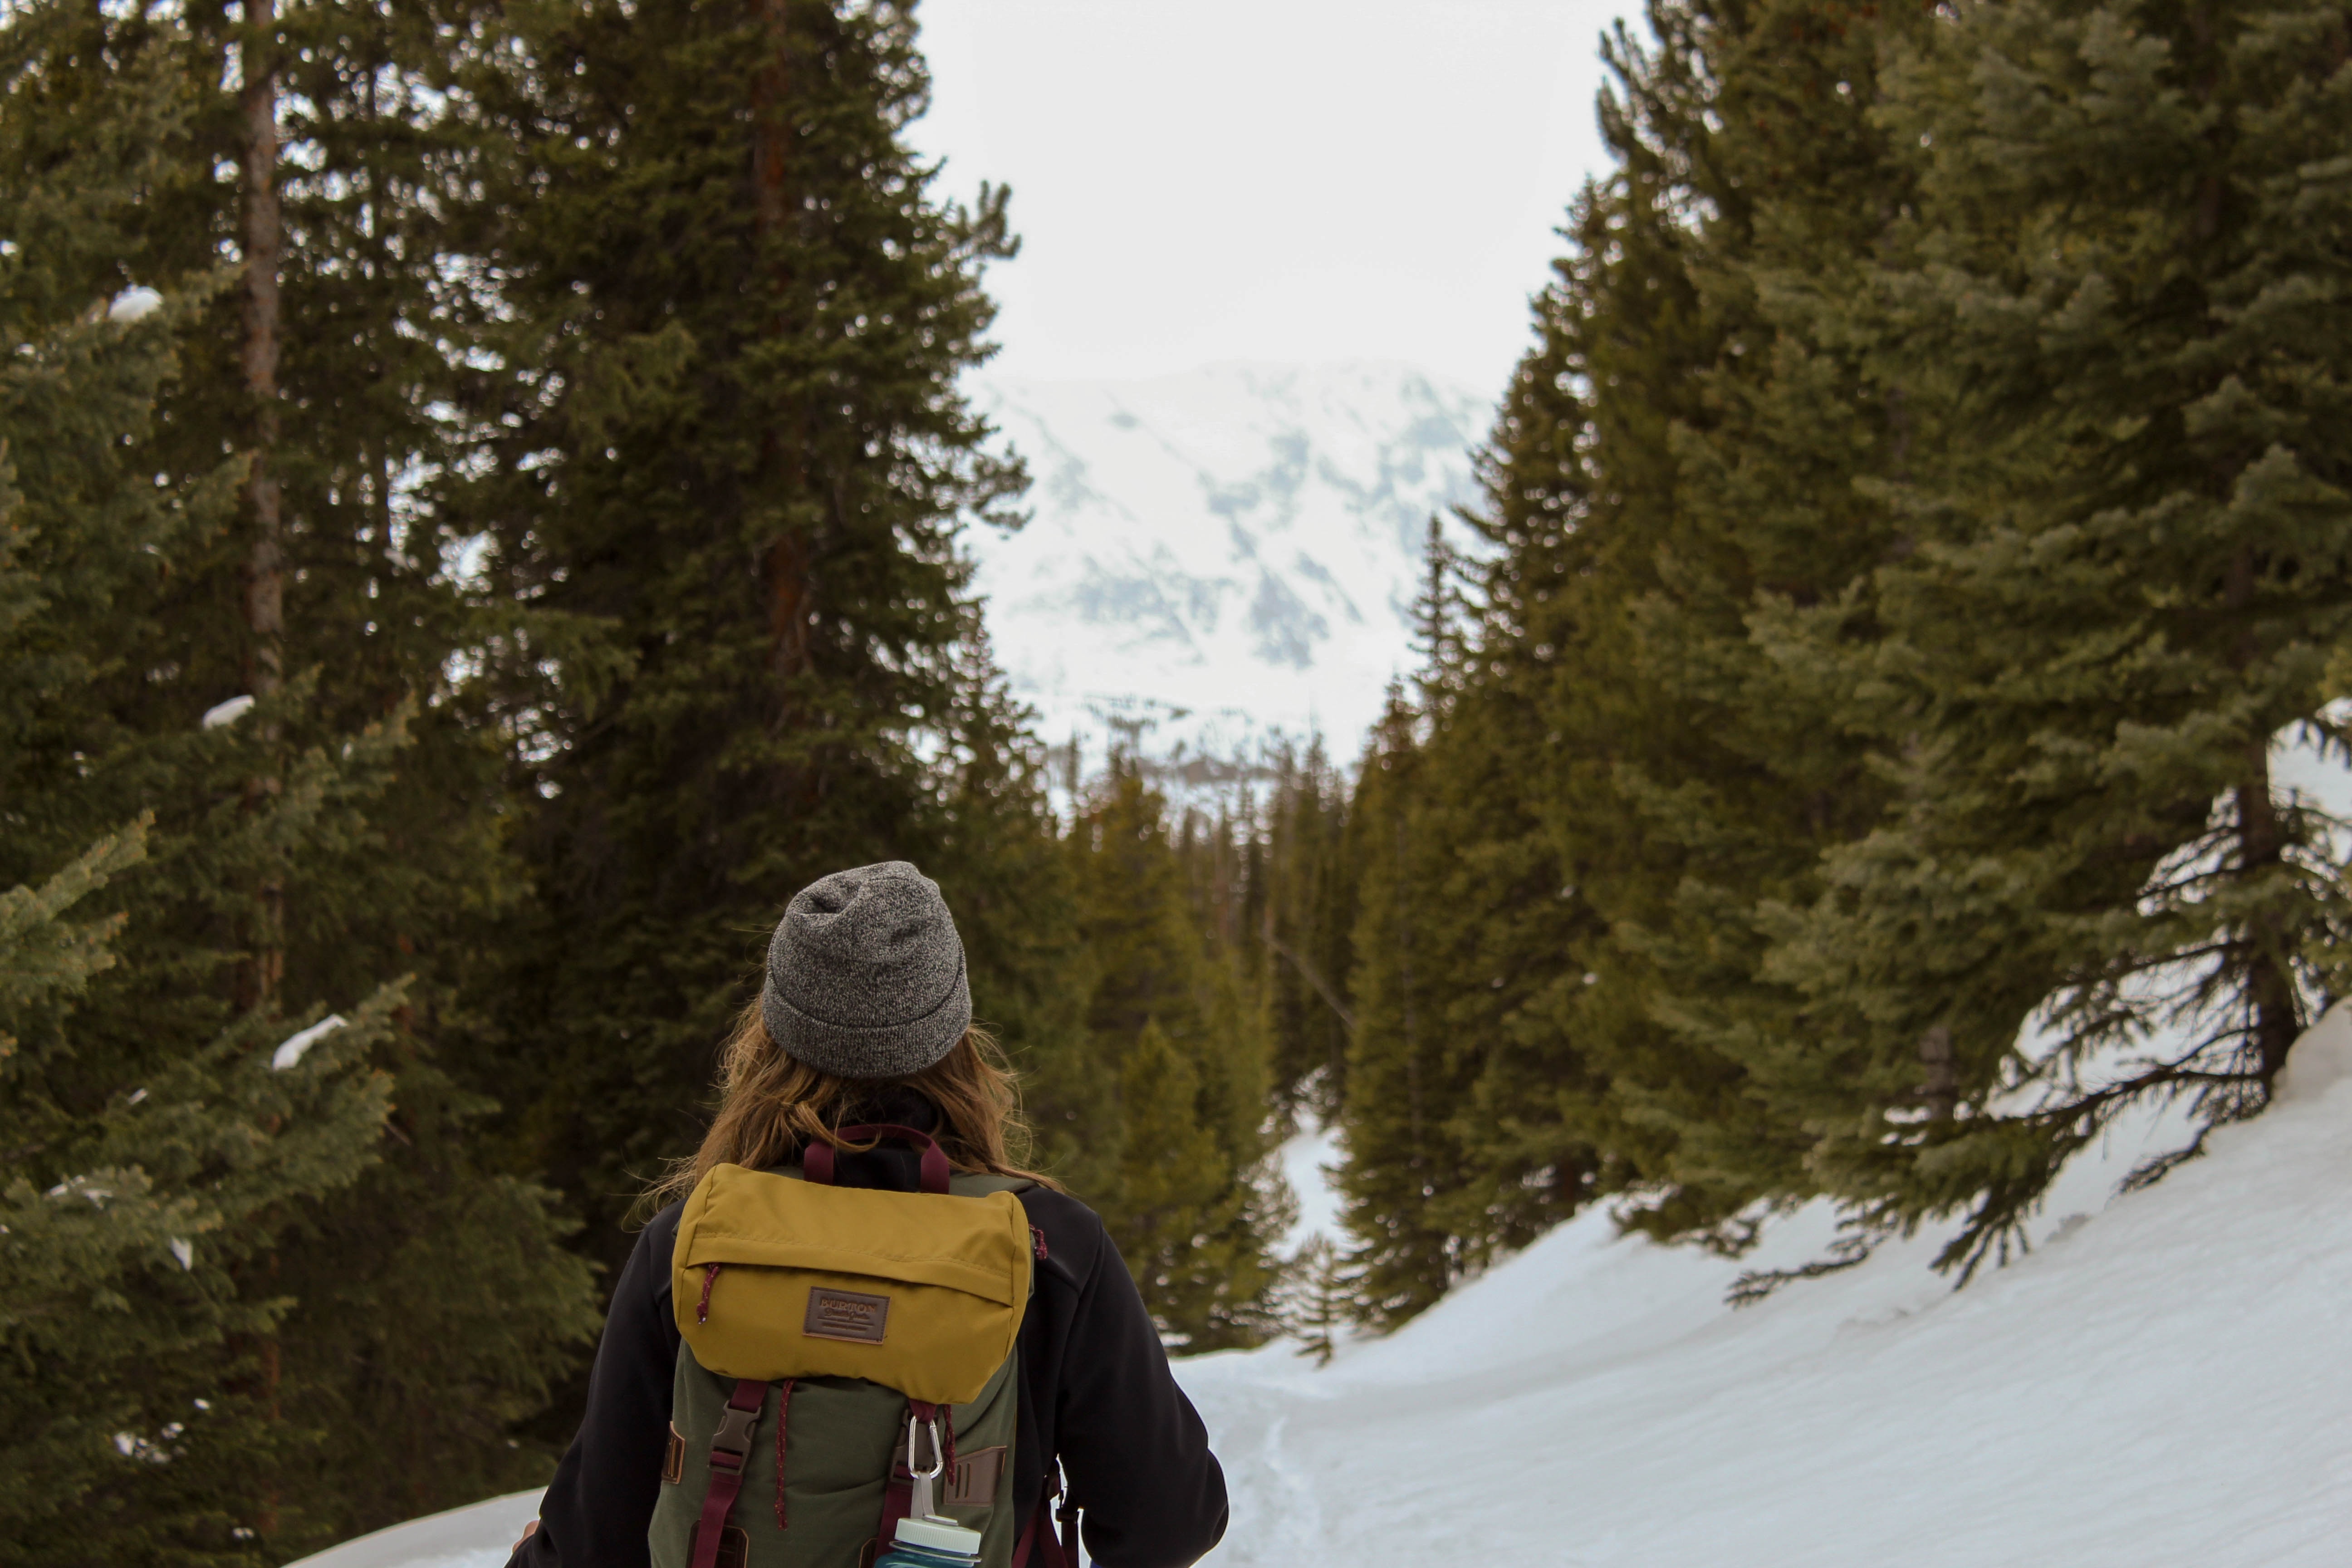 woman snowshoeing outdoors in snow, walking towards a mountain surrounded by pine trees